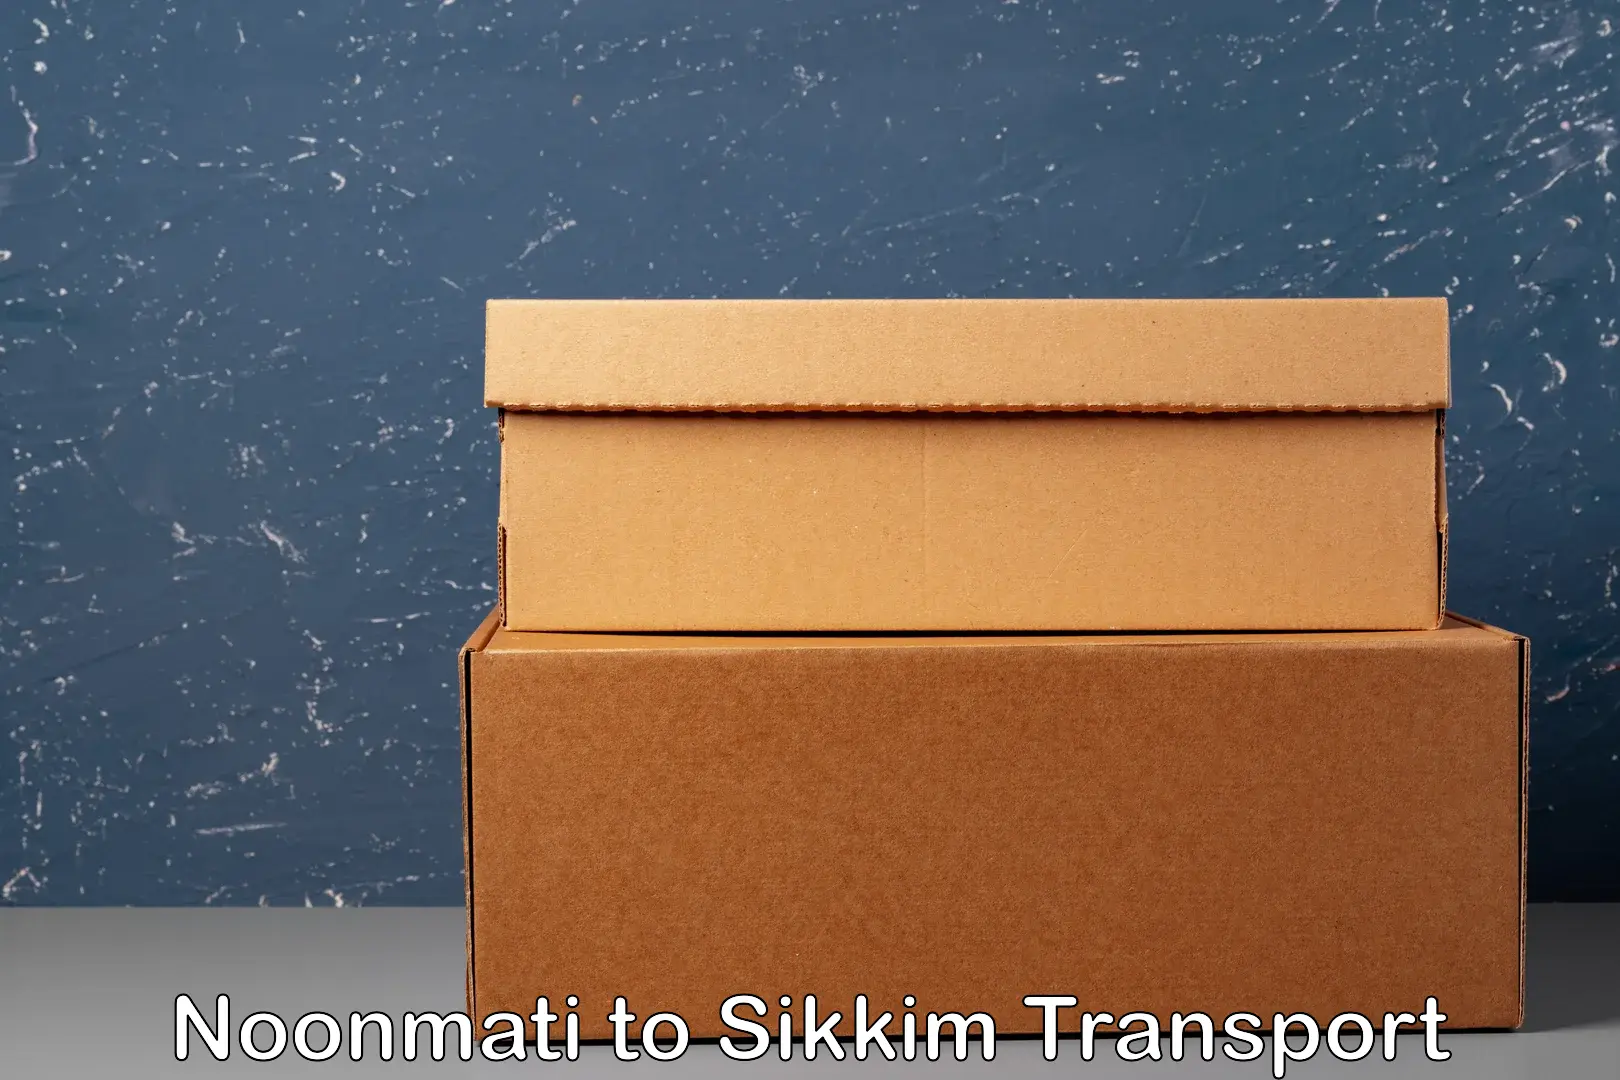 Shipping services Noonmati to Sikkim